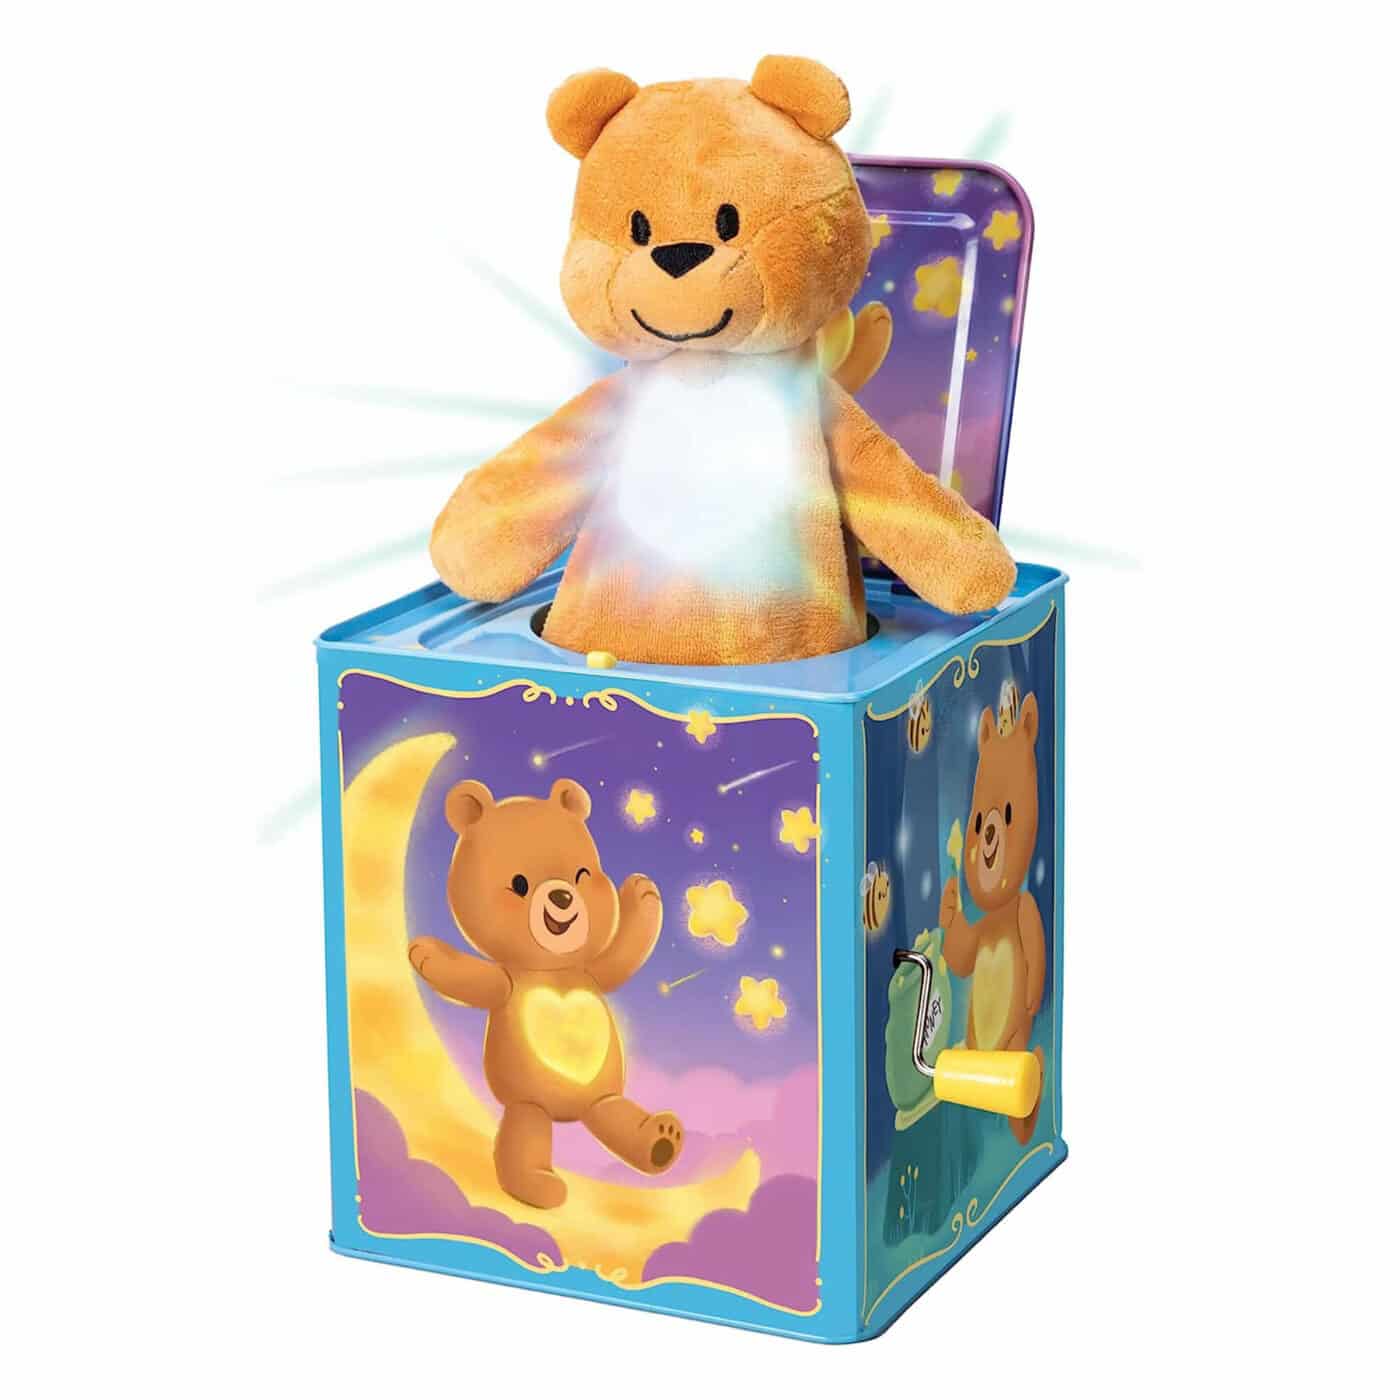 Schylling - Pop and Glow Teddy Musical Jack In The Box